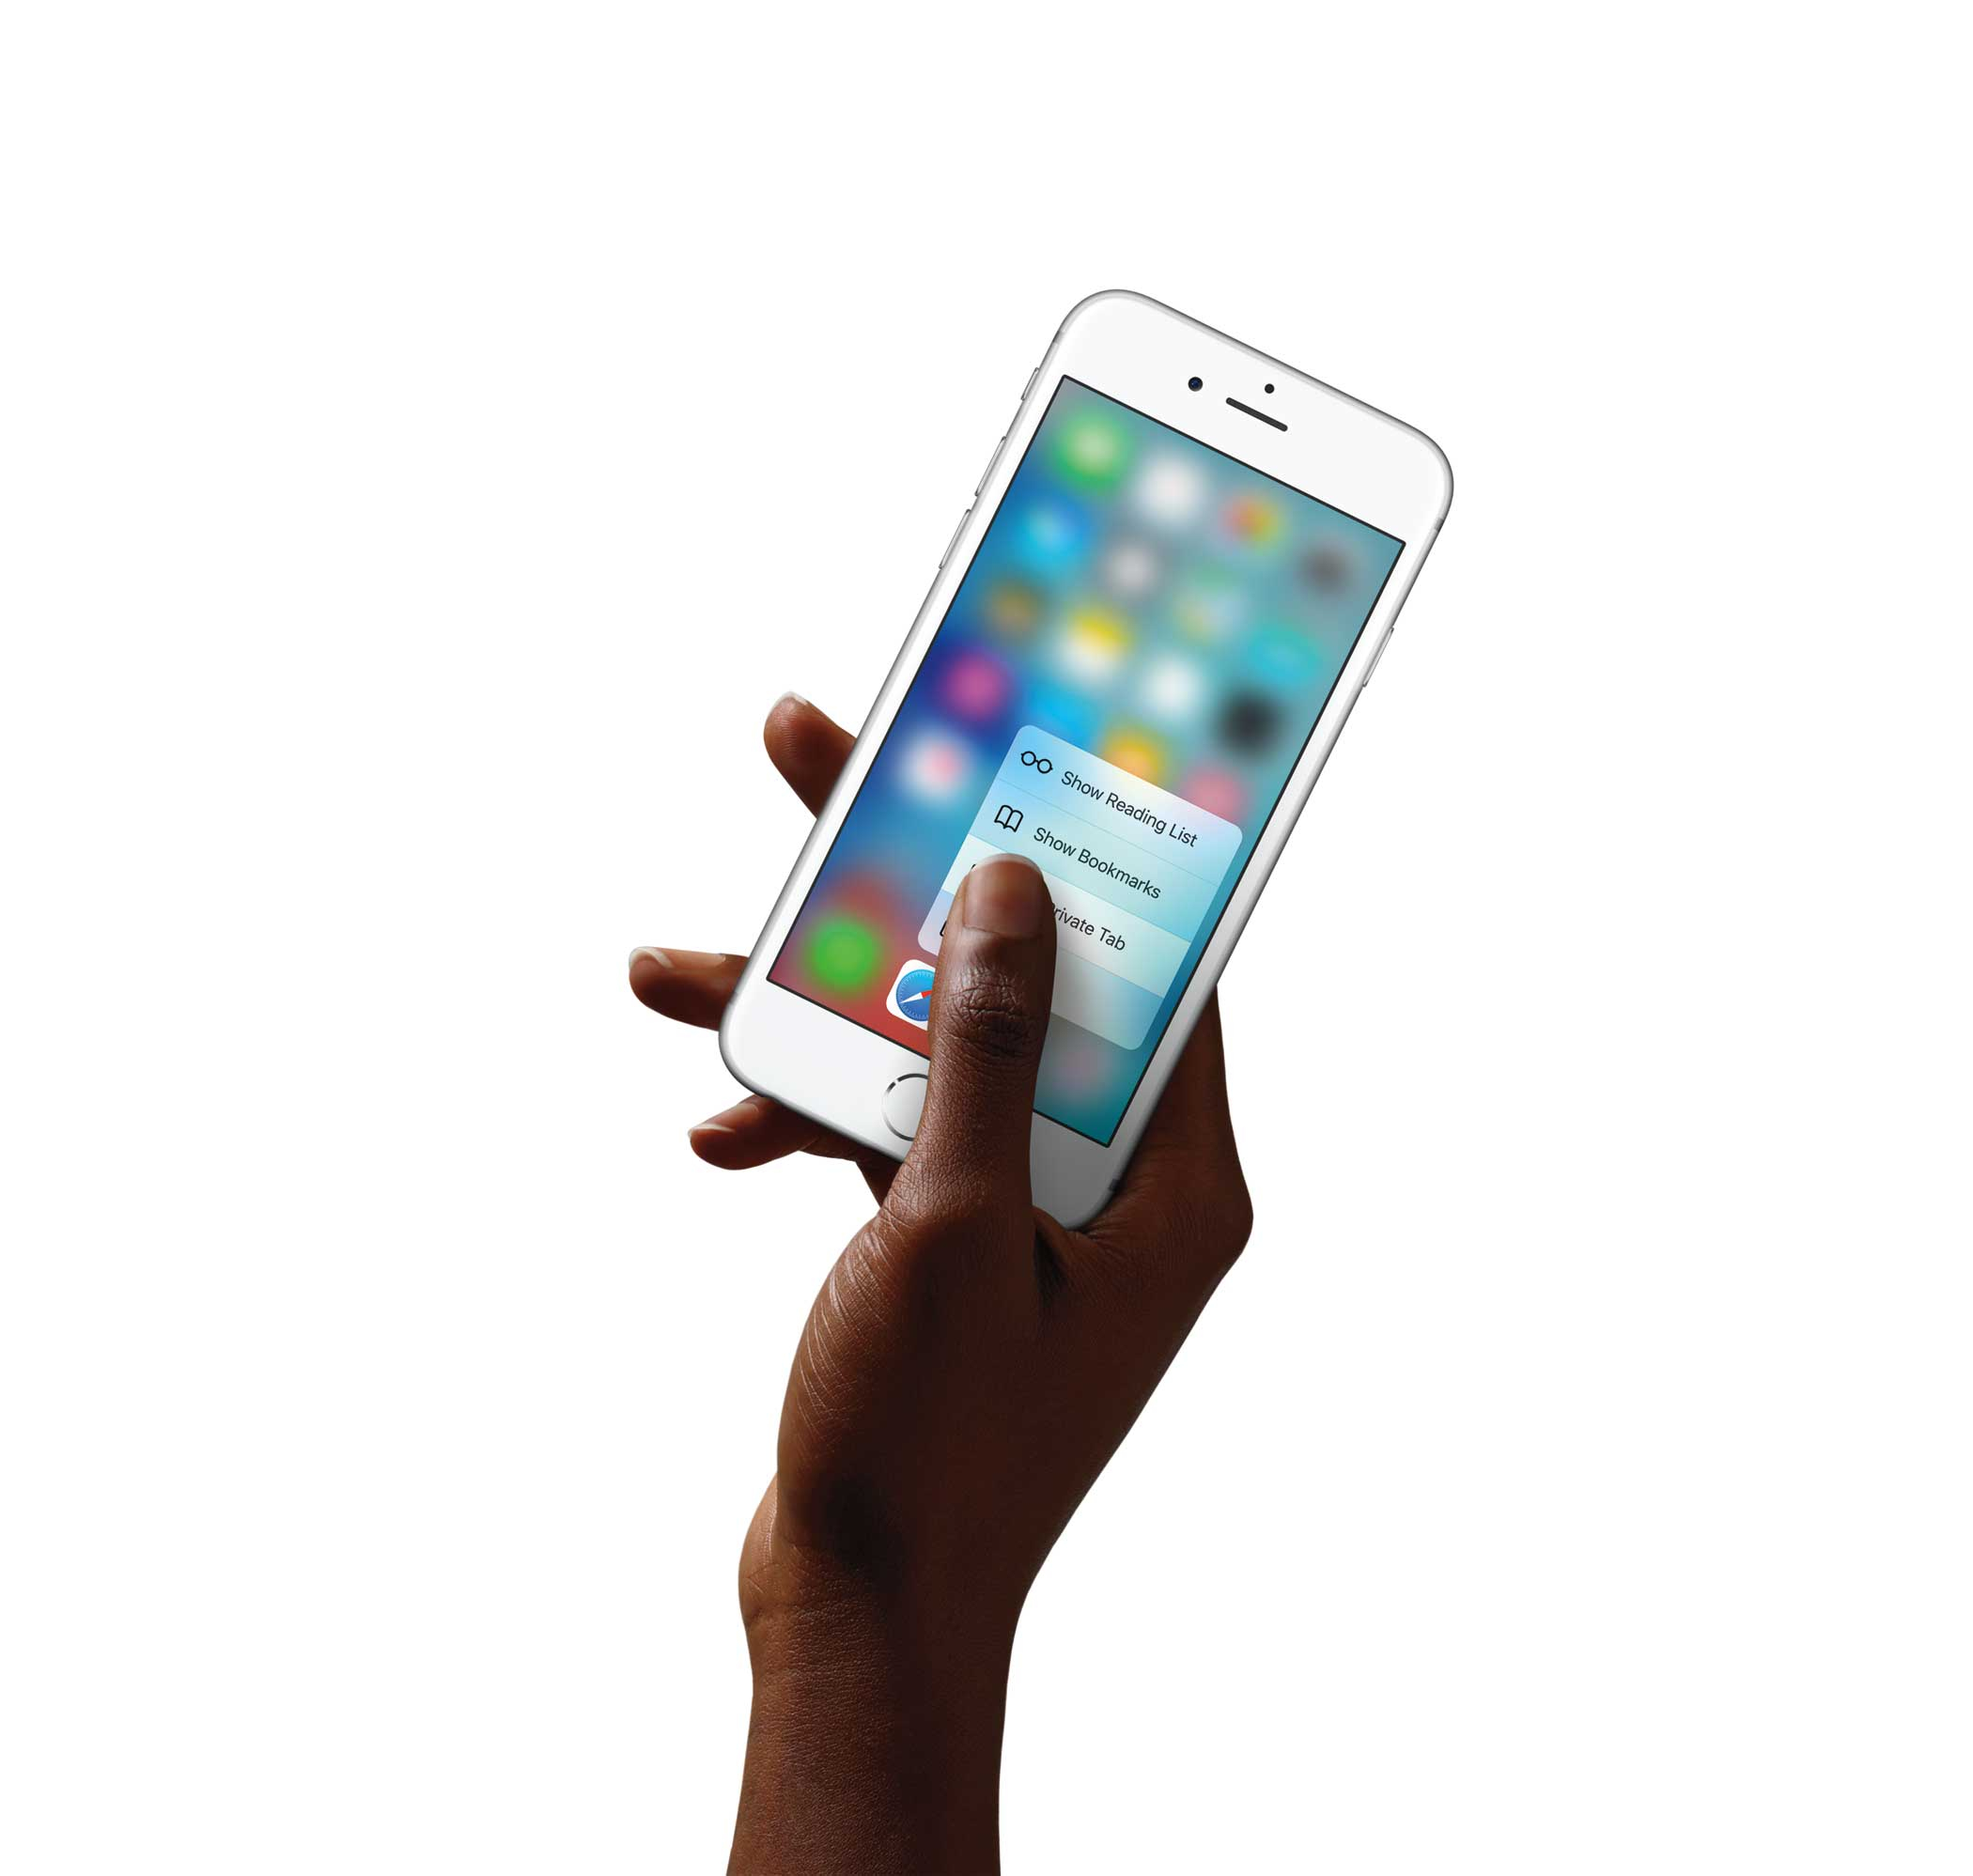 The new iphone has Force Touch (Apple)